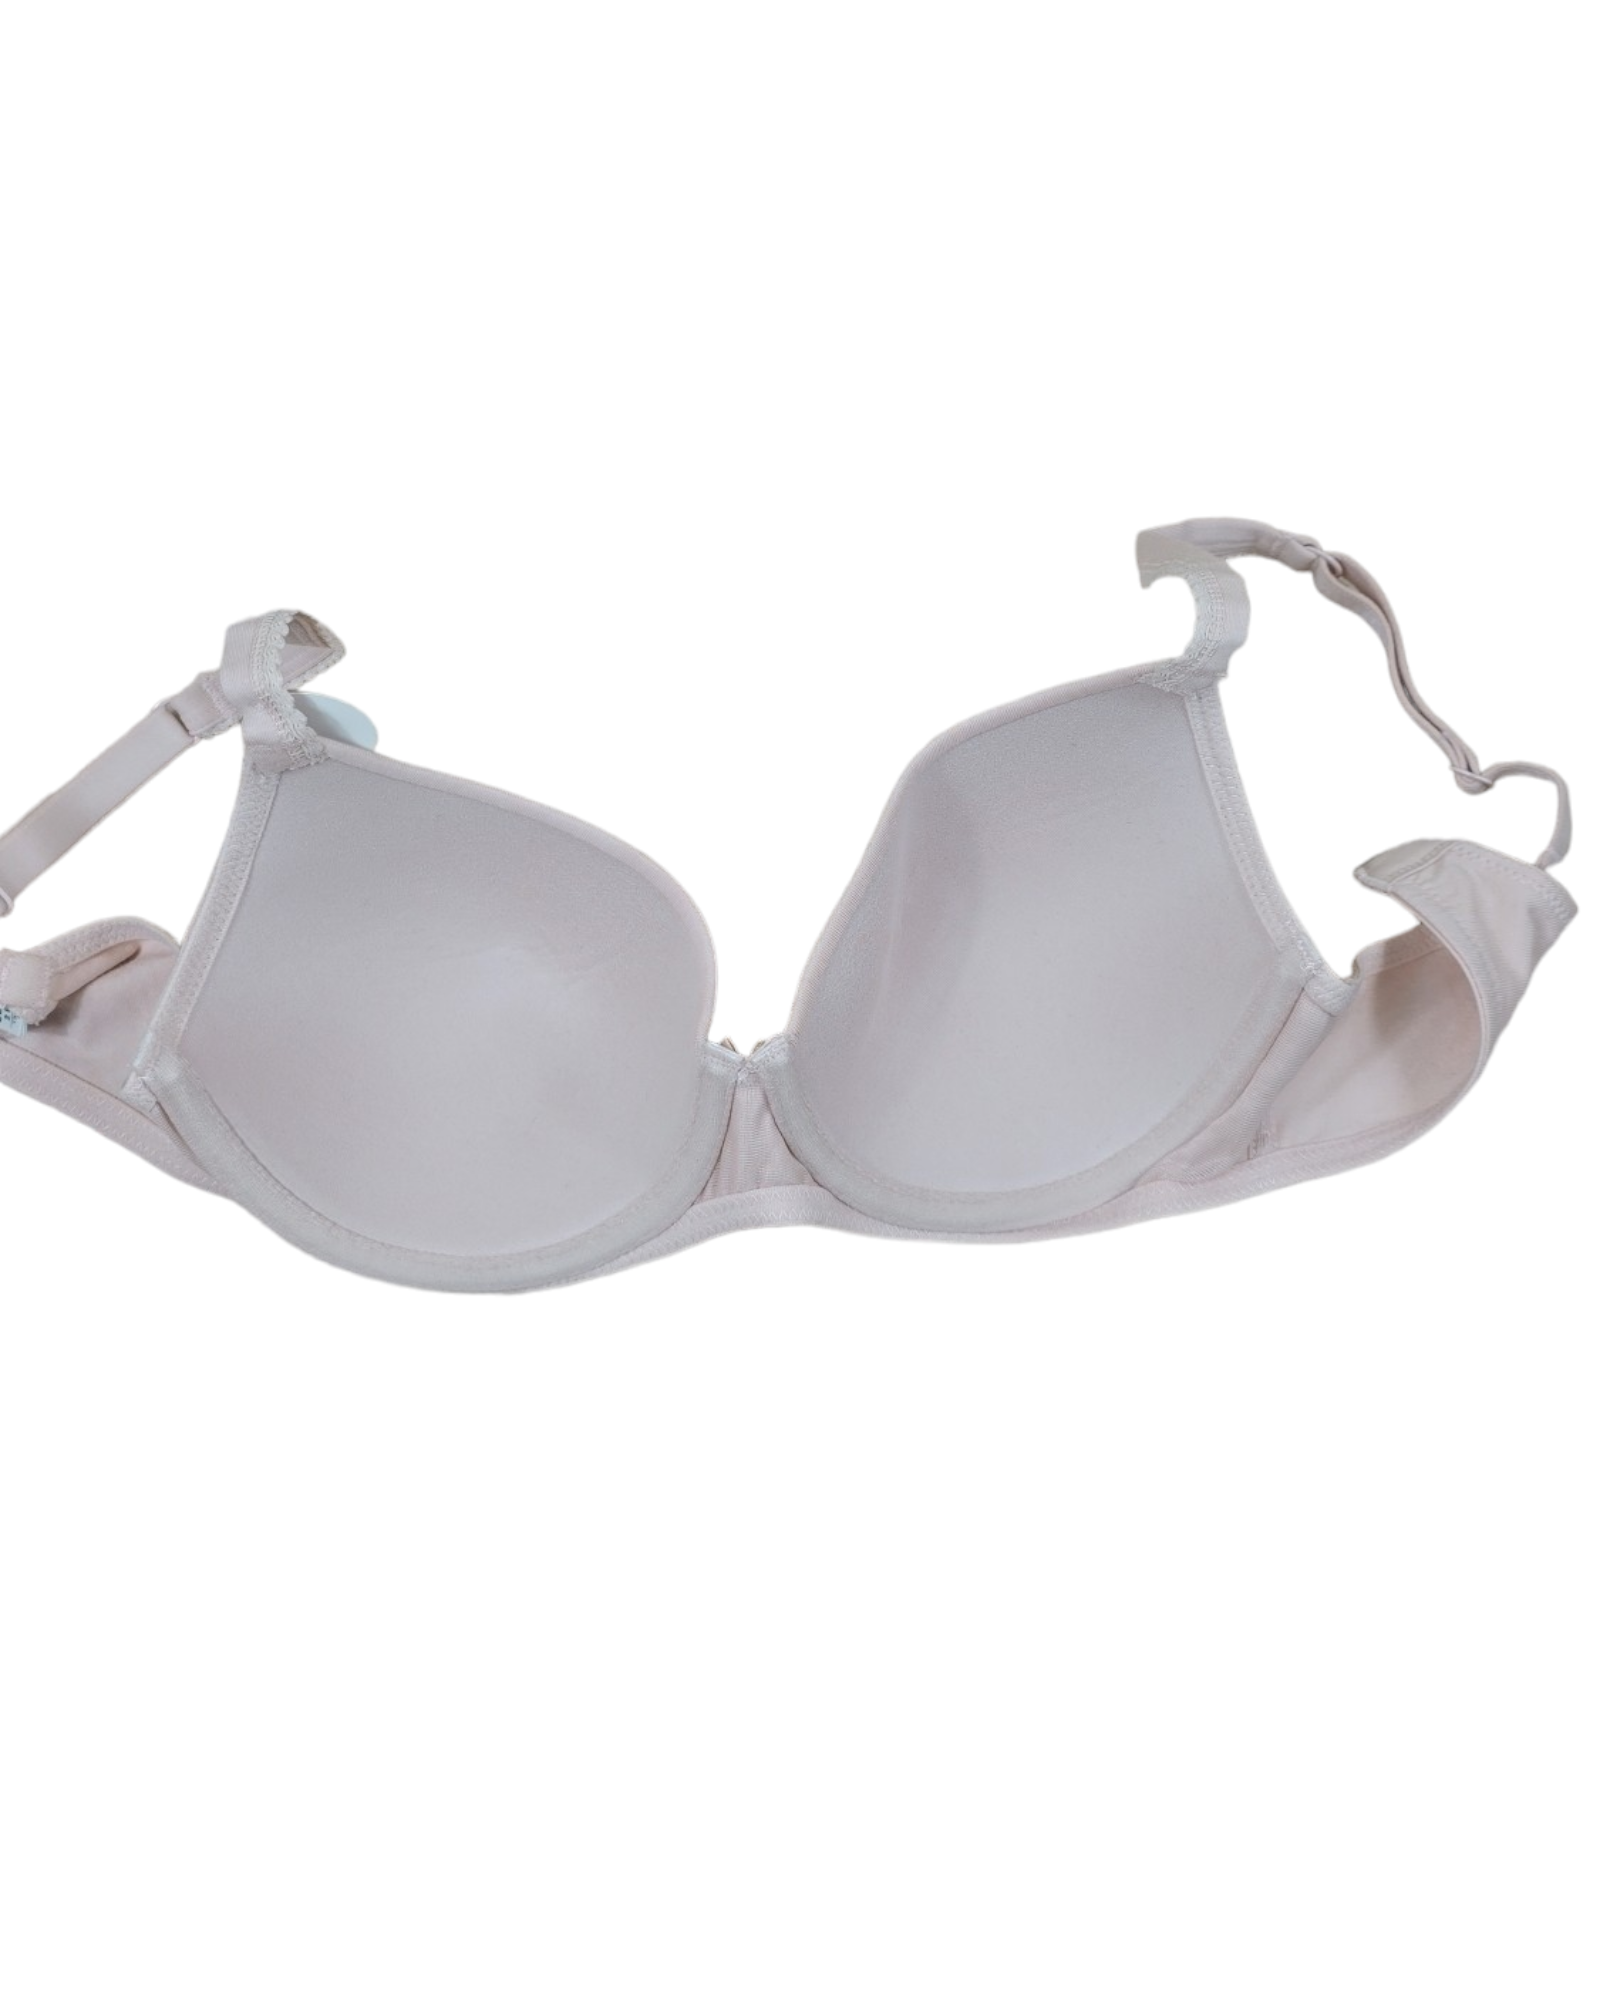 Light Padded Cotton Bra With Underwire